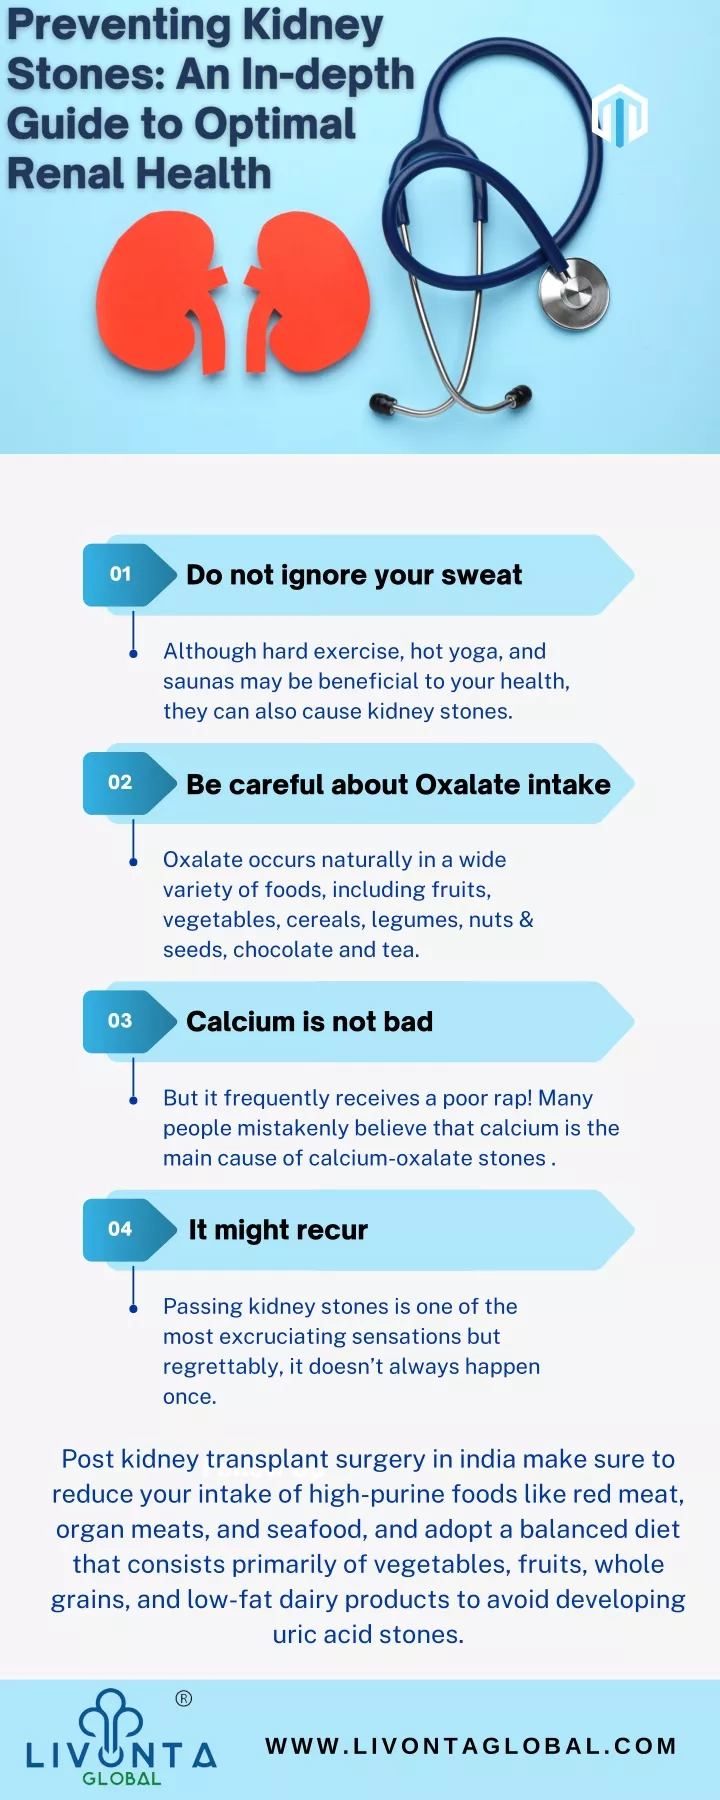 do not ignore your sweat